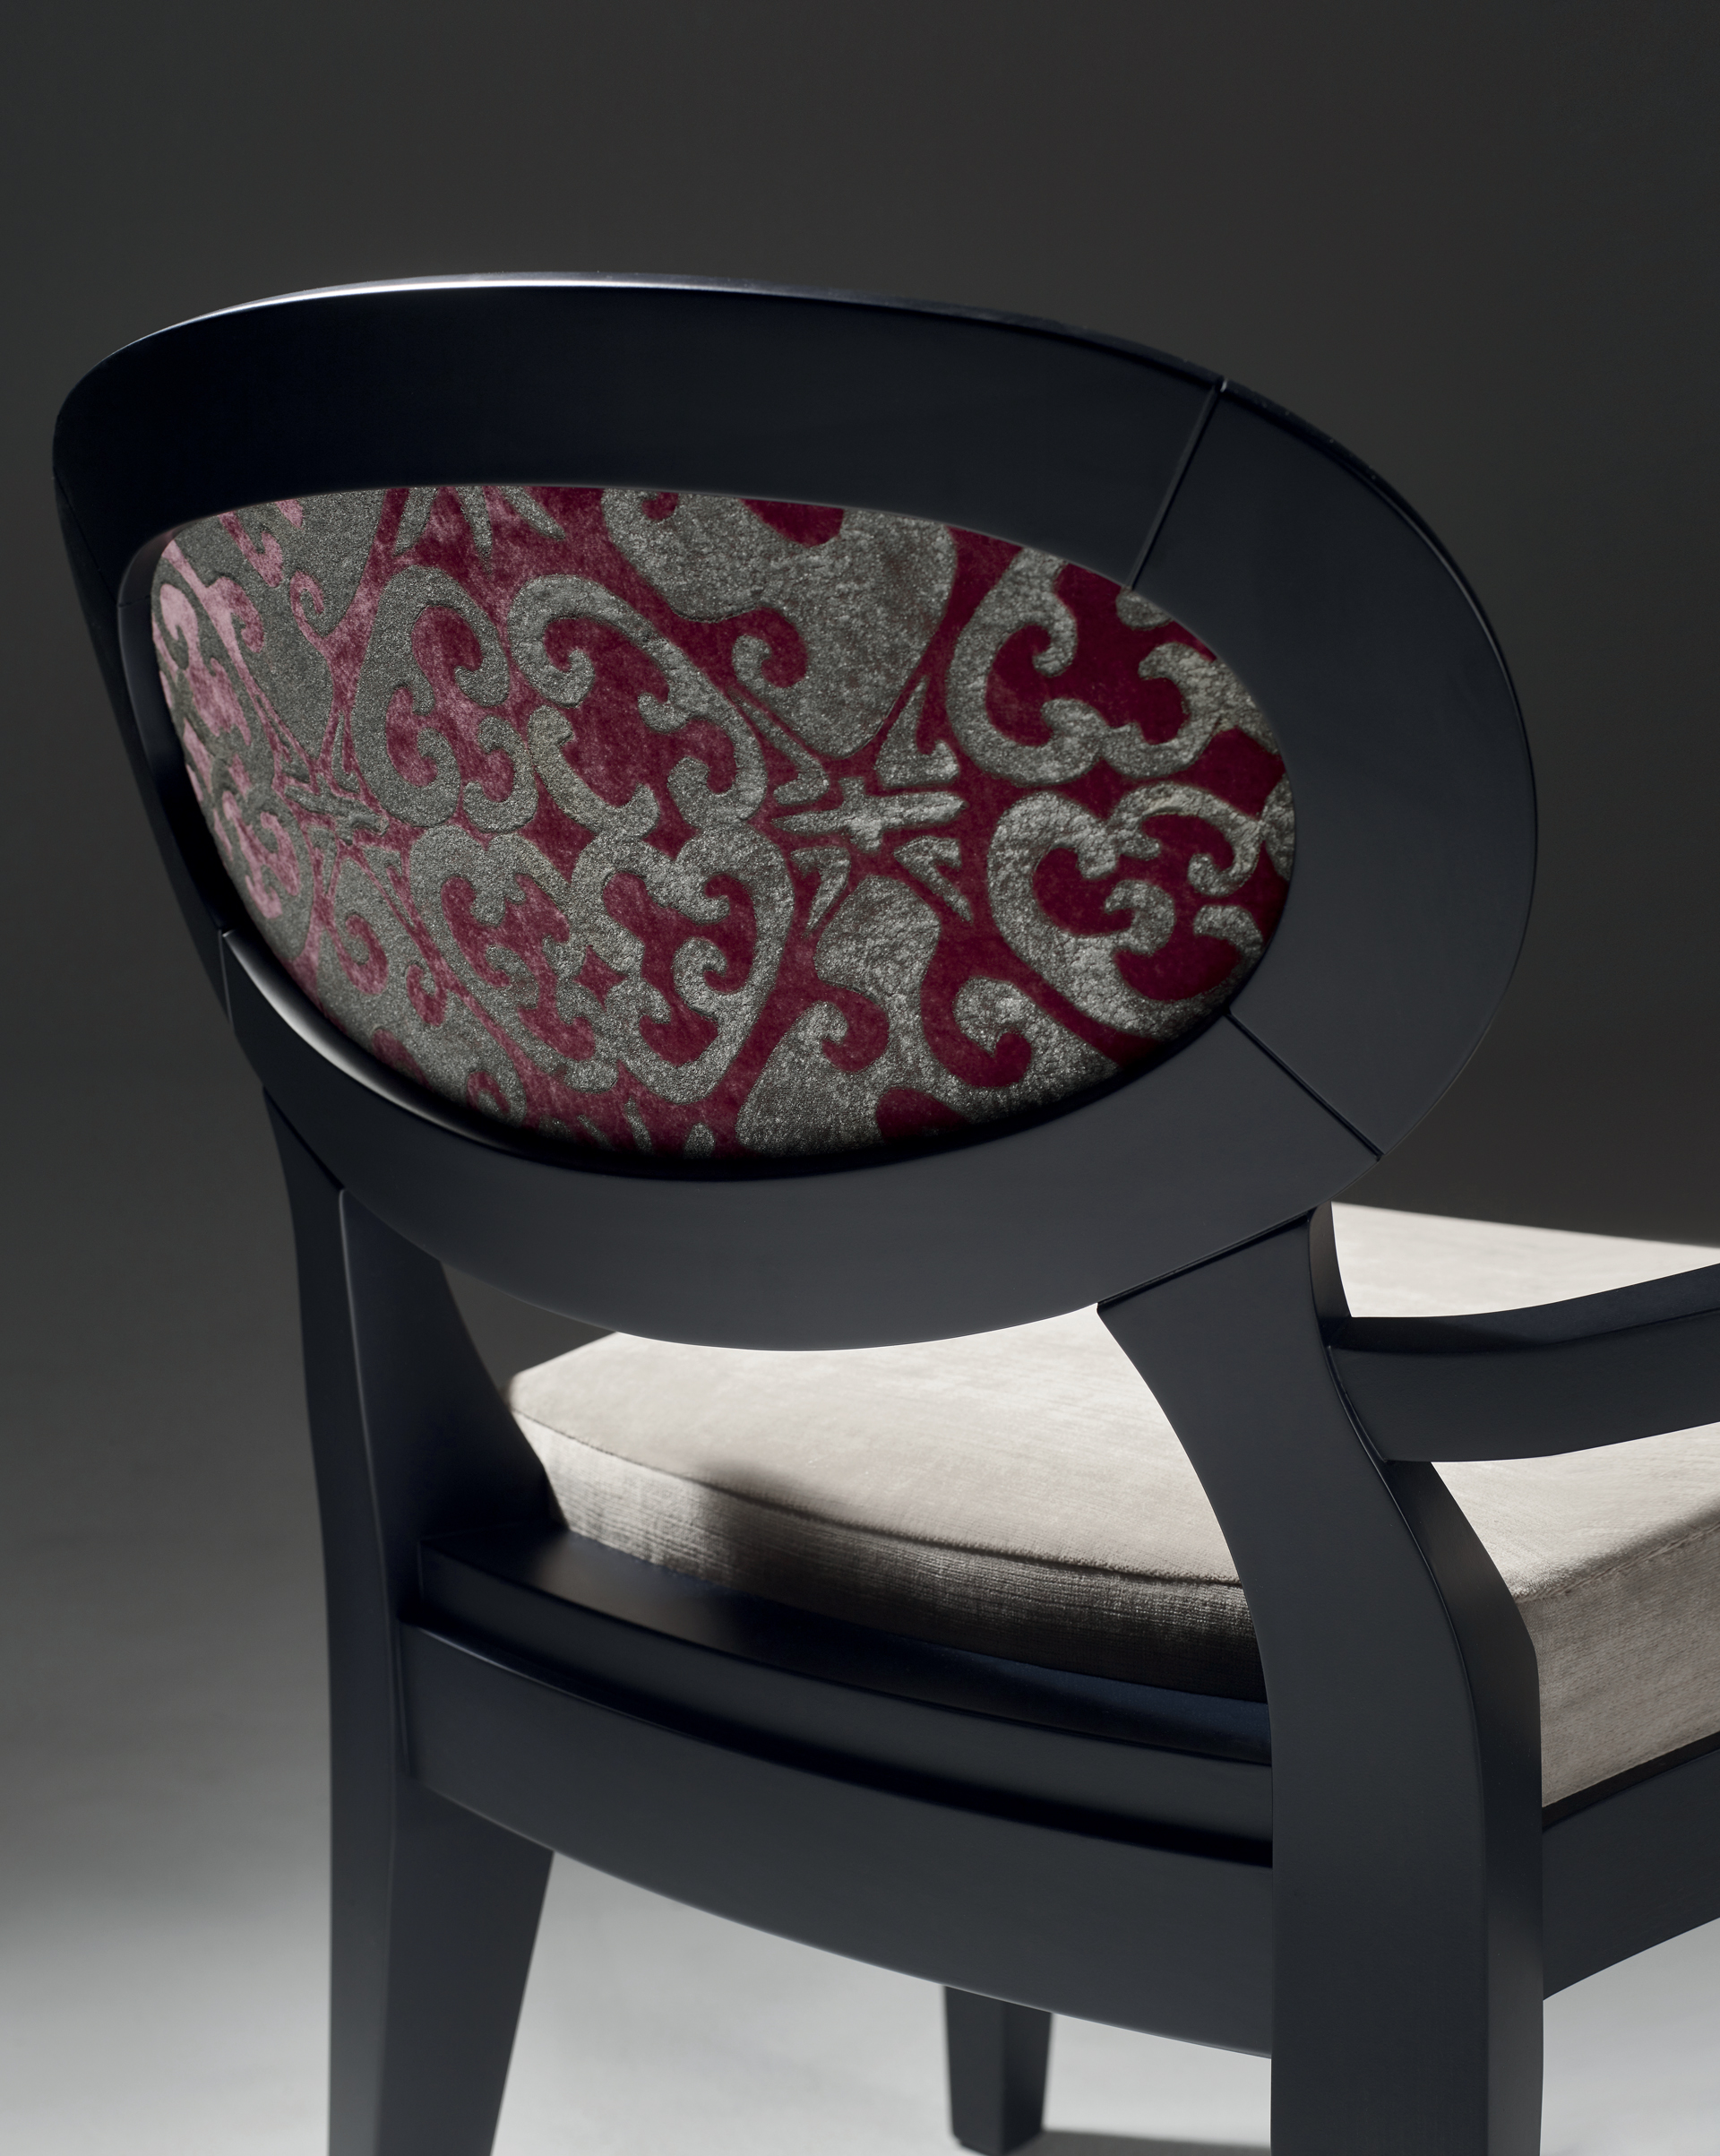 Back detail of Anima, a wooden and fabric or leather dining chair available with different combinations of fabrics and colors, from Promemoria's catalogue | Promemoria